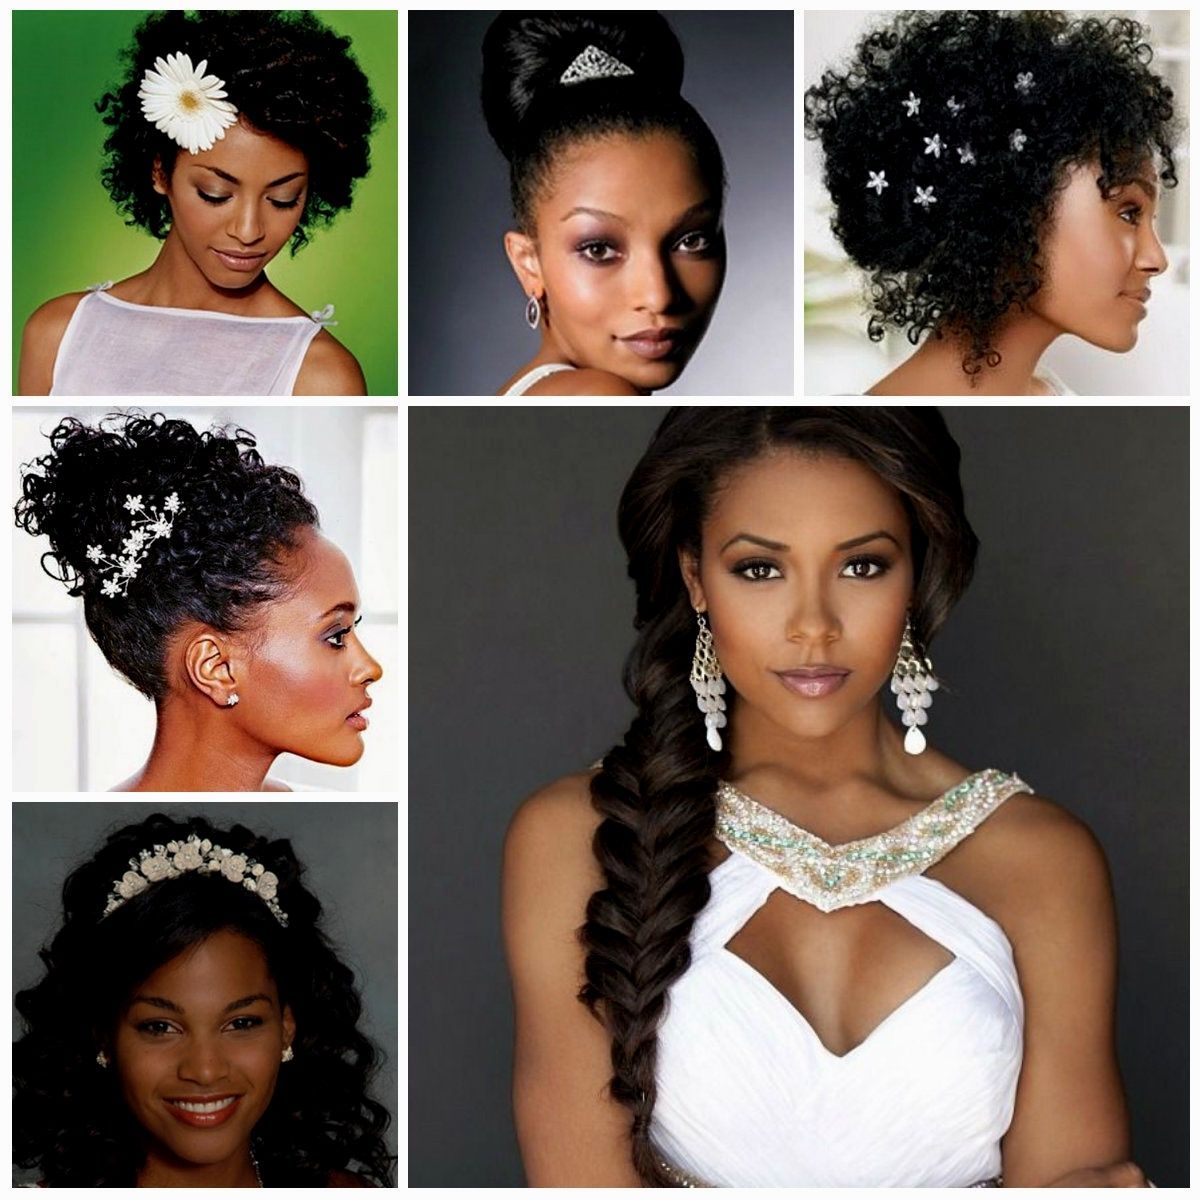 Beautiful Black Bridesmaid Hairstyles Images – Styles & Ideas 2018 Throughout Current Wedding Hairstyles For Long Relaxed Hair (View 14 of 15)